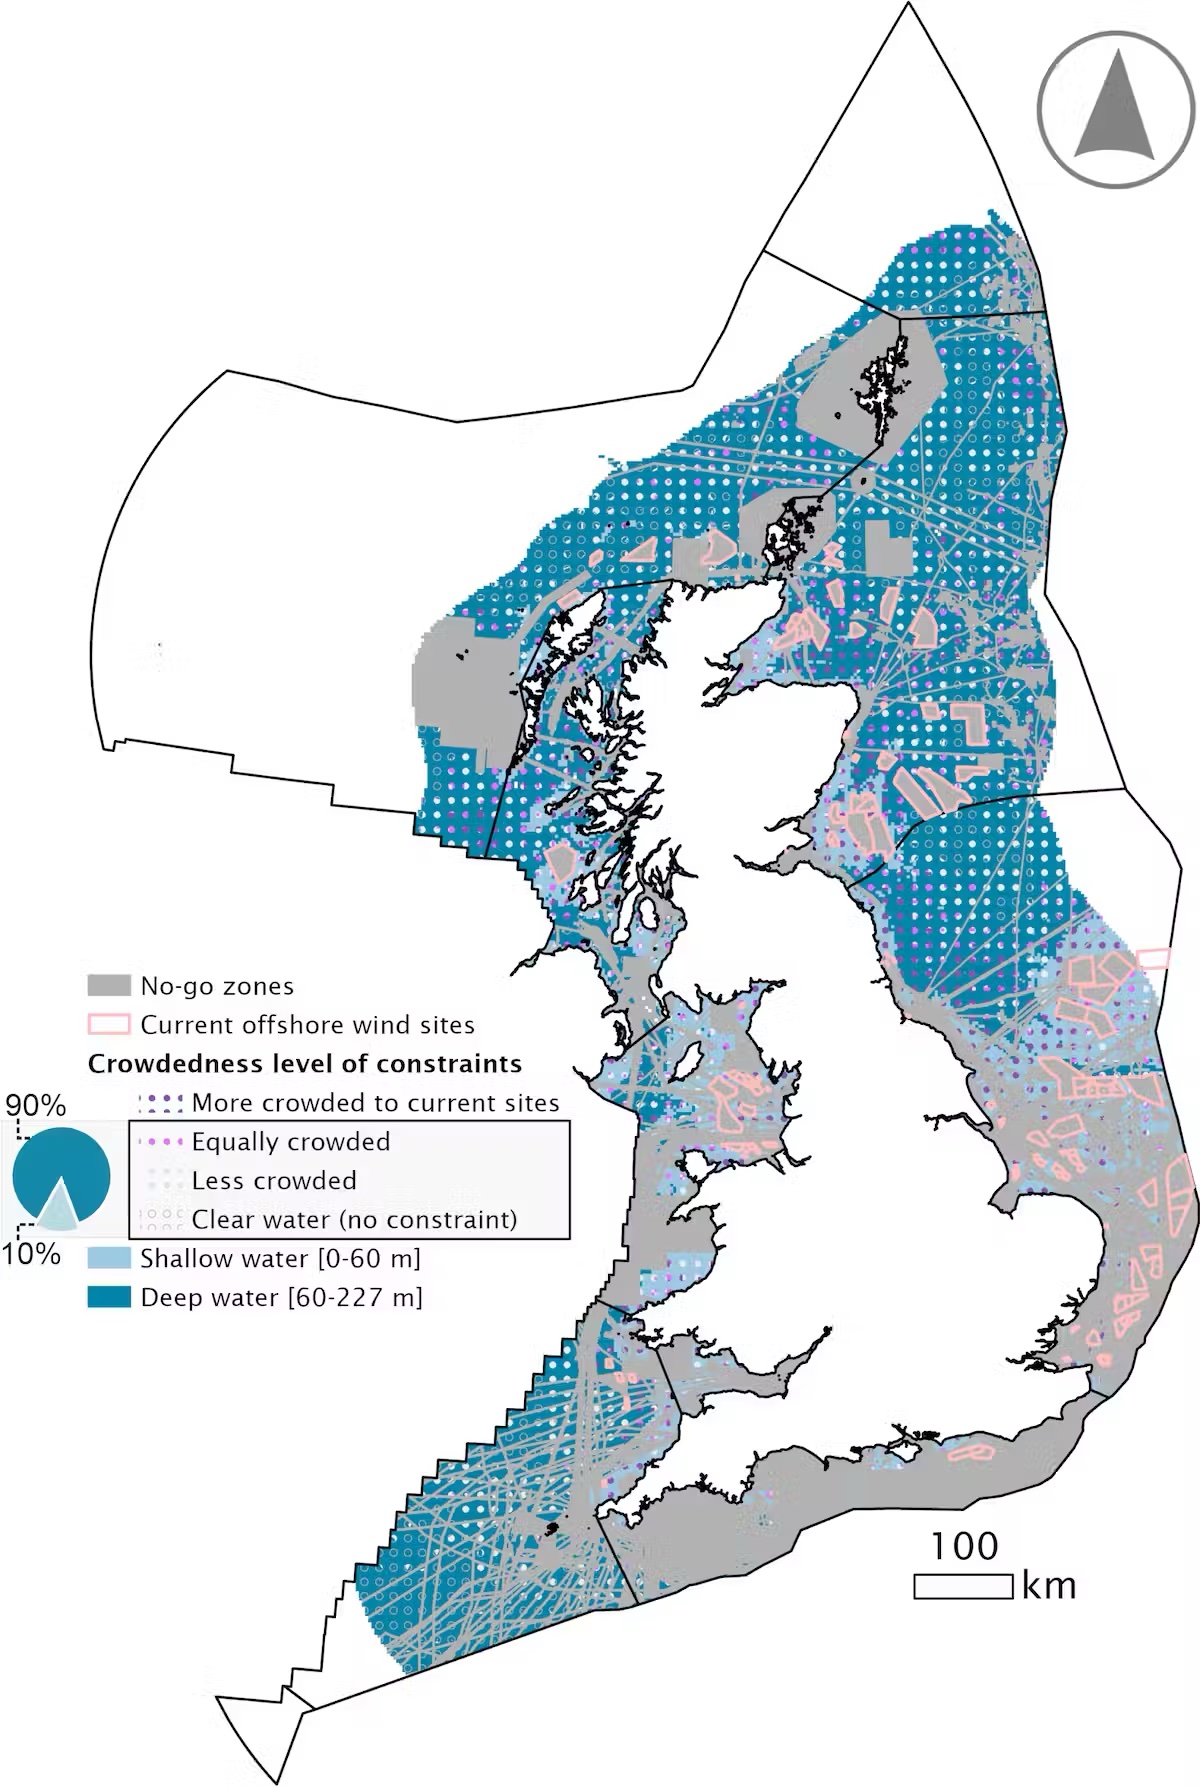 Map of UK offshore waters showing space available for wind farms